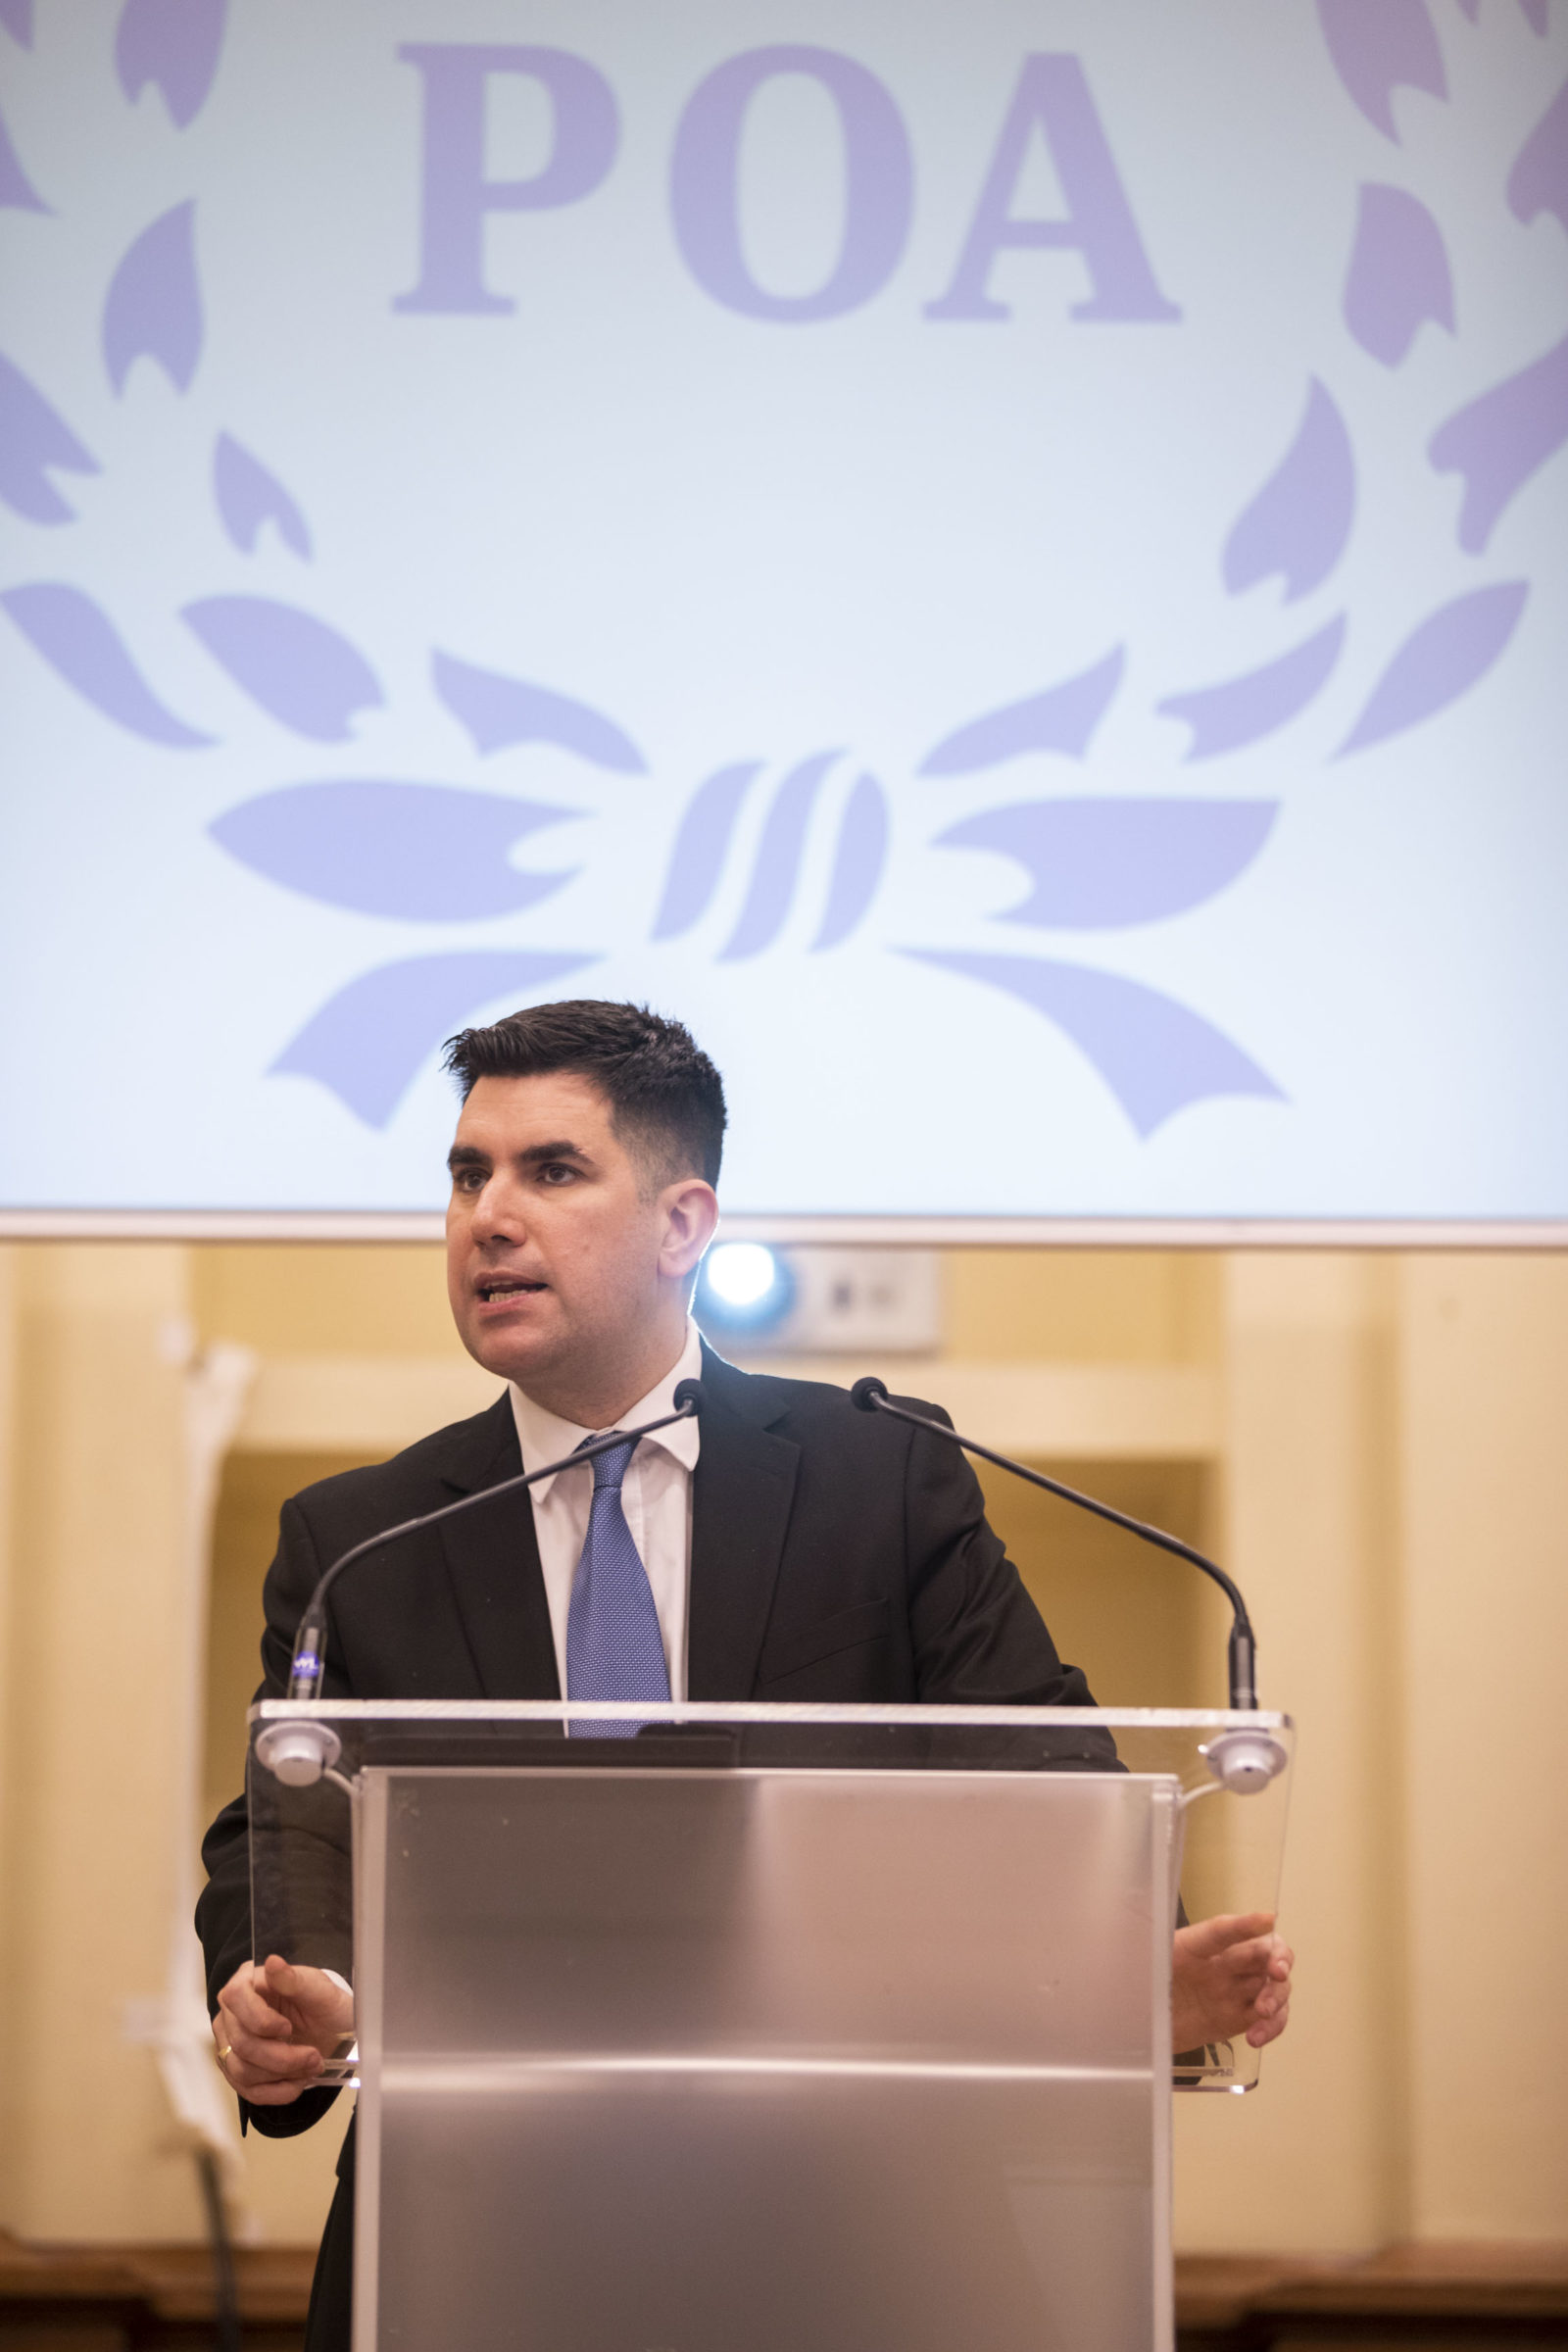 Richard Burgon , this photo is licensed under a Creative Commons Attribution 4.0 License, meaning it can be used freely with attribution.